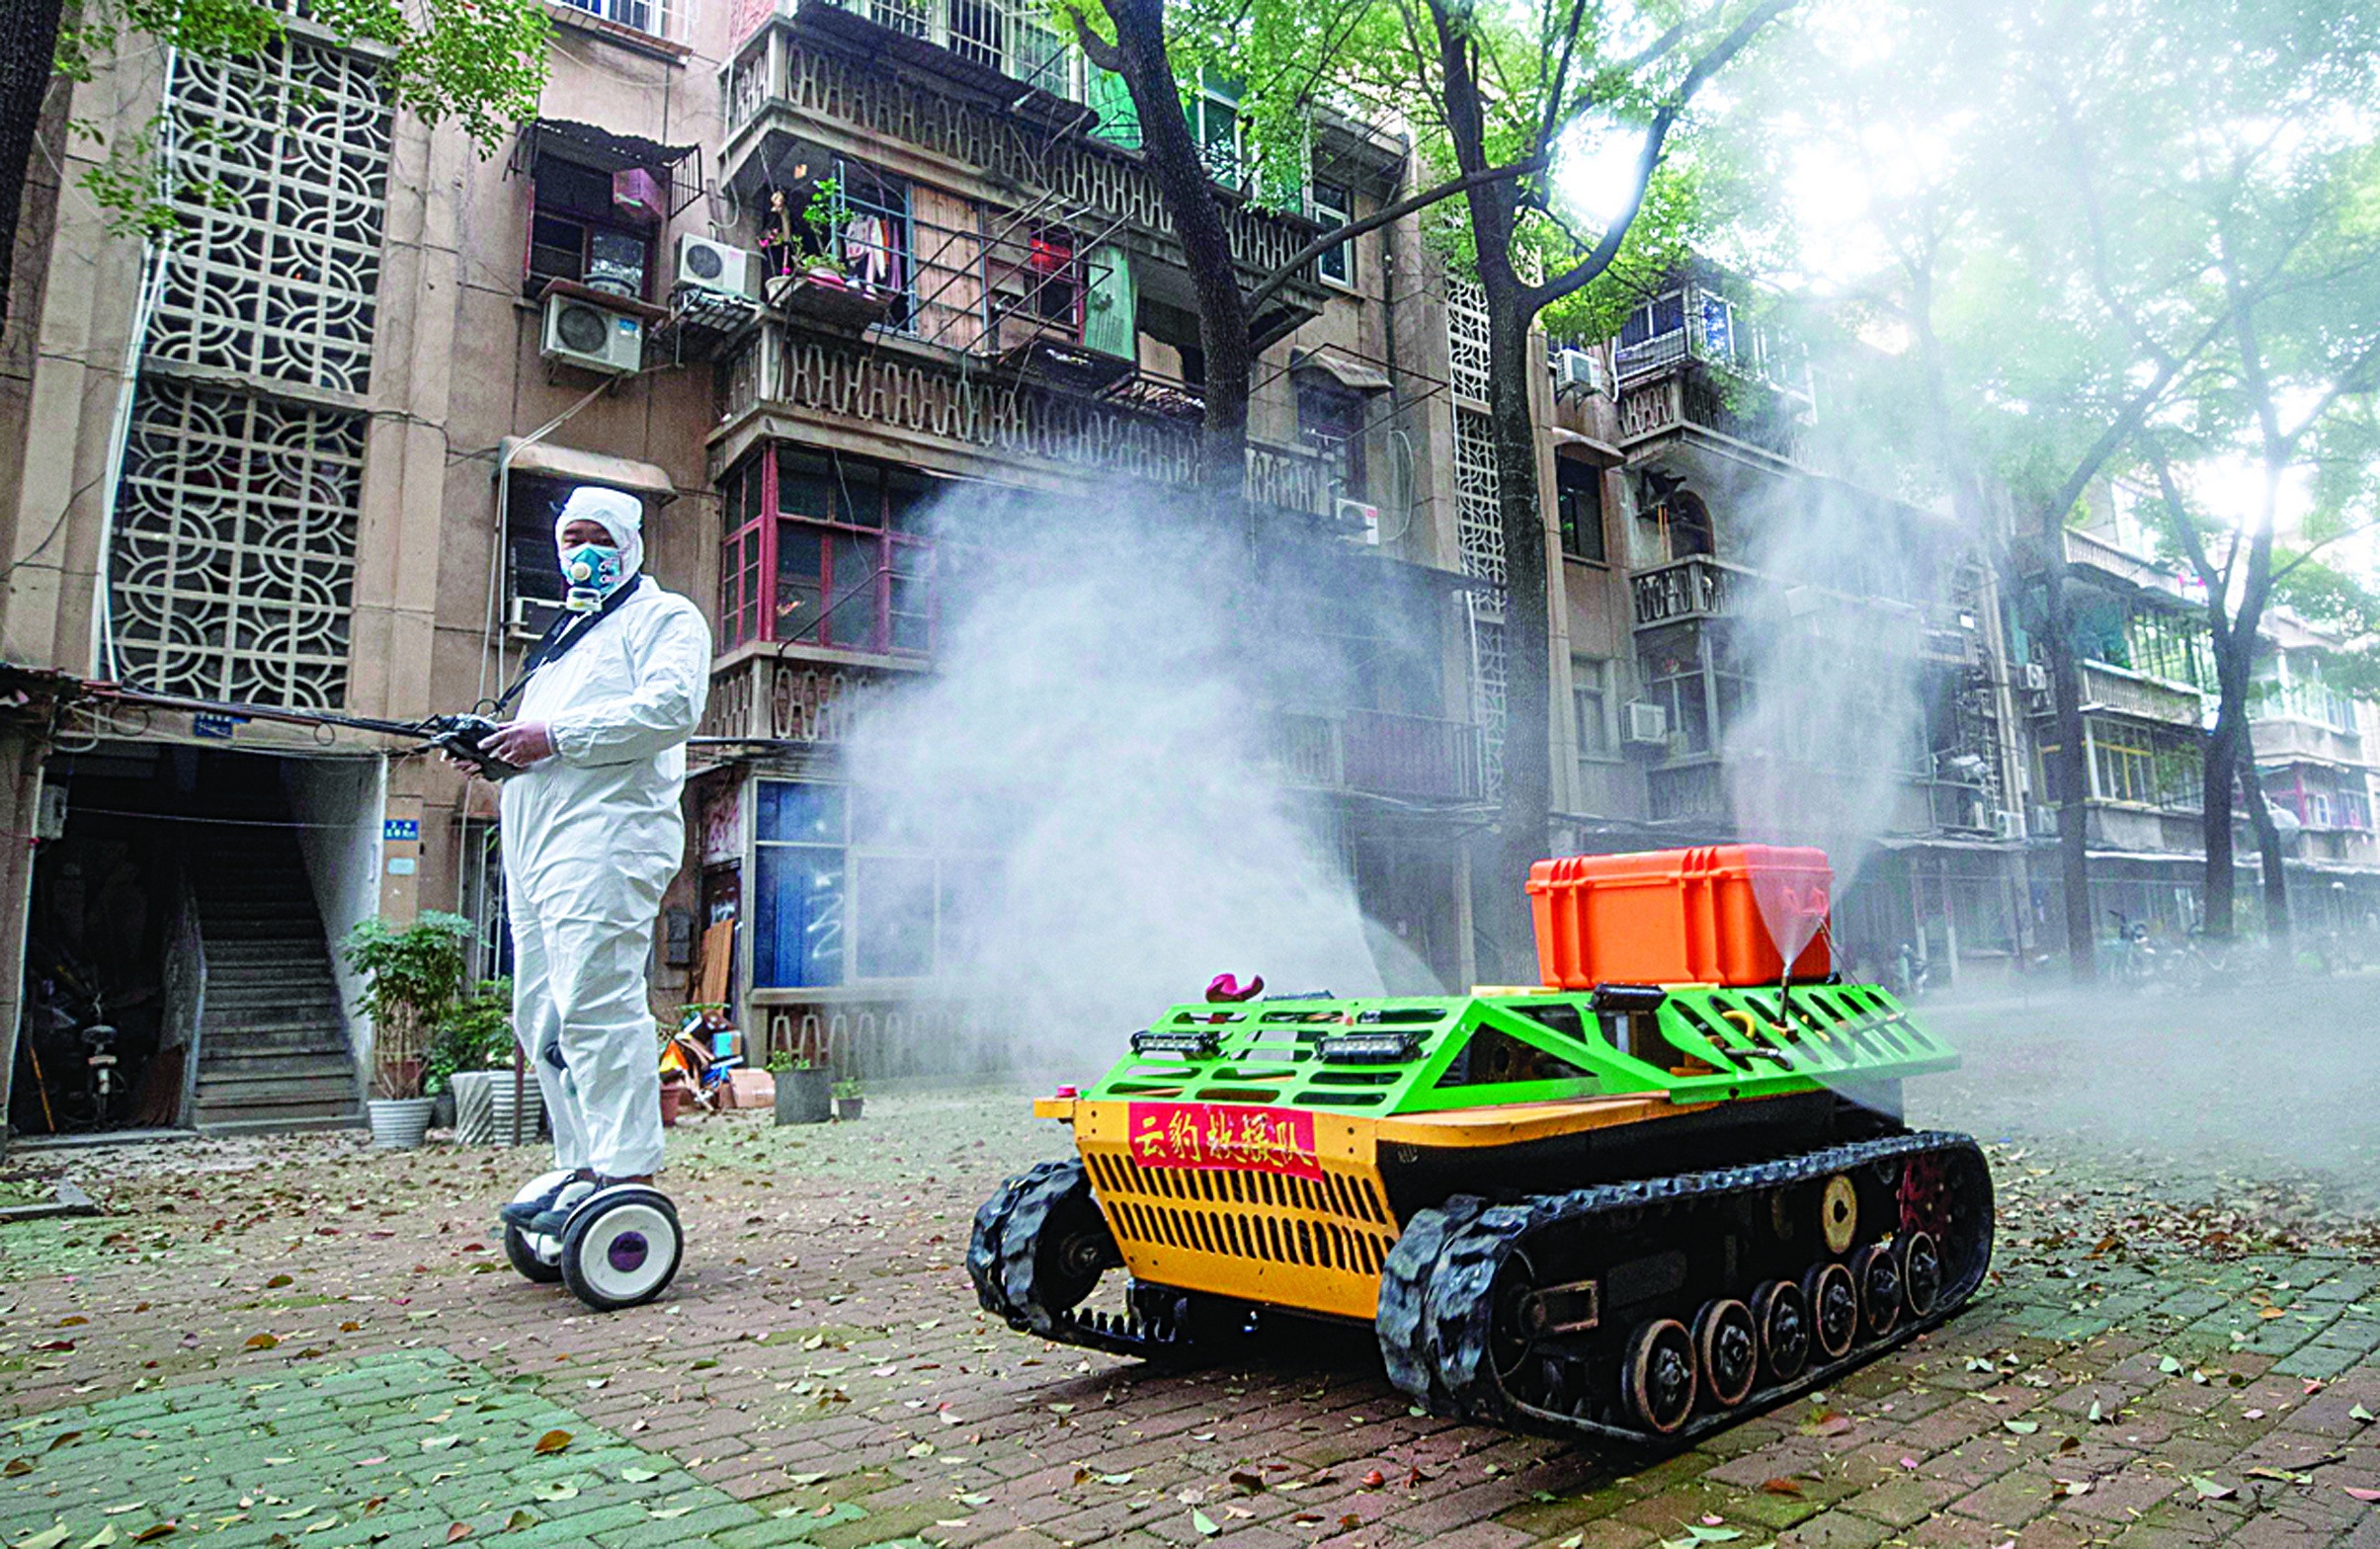 TOPSHOT - A volunteer operates a remote controlled disinfection robot to disinfect a residental area amid the COVID-19 coronavirus outbreak in Wuhan in China's central Hubei province on March 16, 2020. - China tightened quarantine measures for international arrivals on March 16 as the country worries about a rise in imported cases of the deadly coronavirus and anger rages online at how Europe and the United States are handling the pandemic. (Photo by STR / AFP) / China OUT